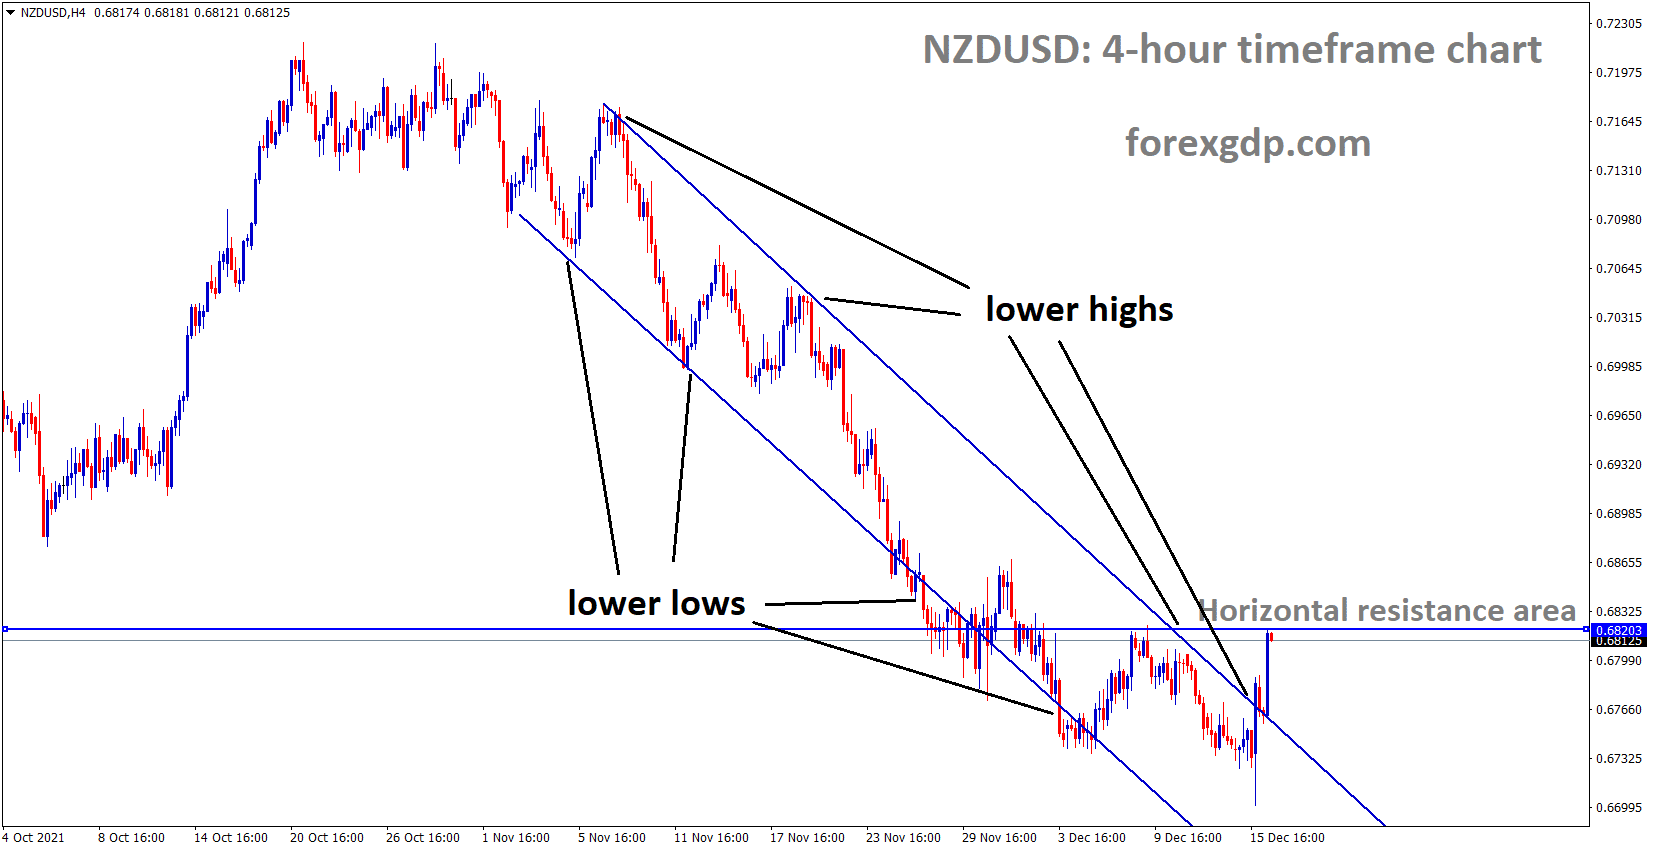 NZDUSD is moving in the Descending channel and the market reached the lower high